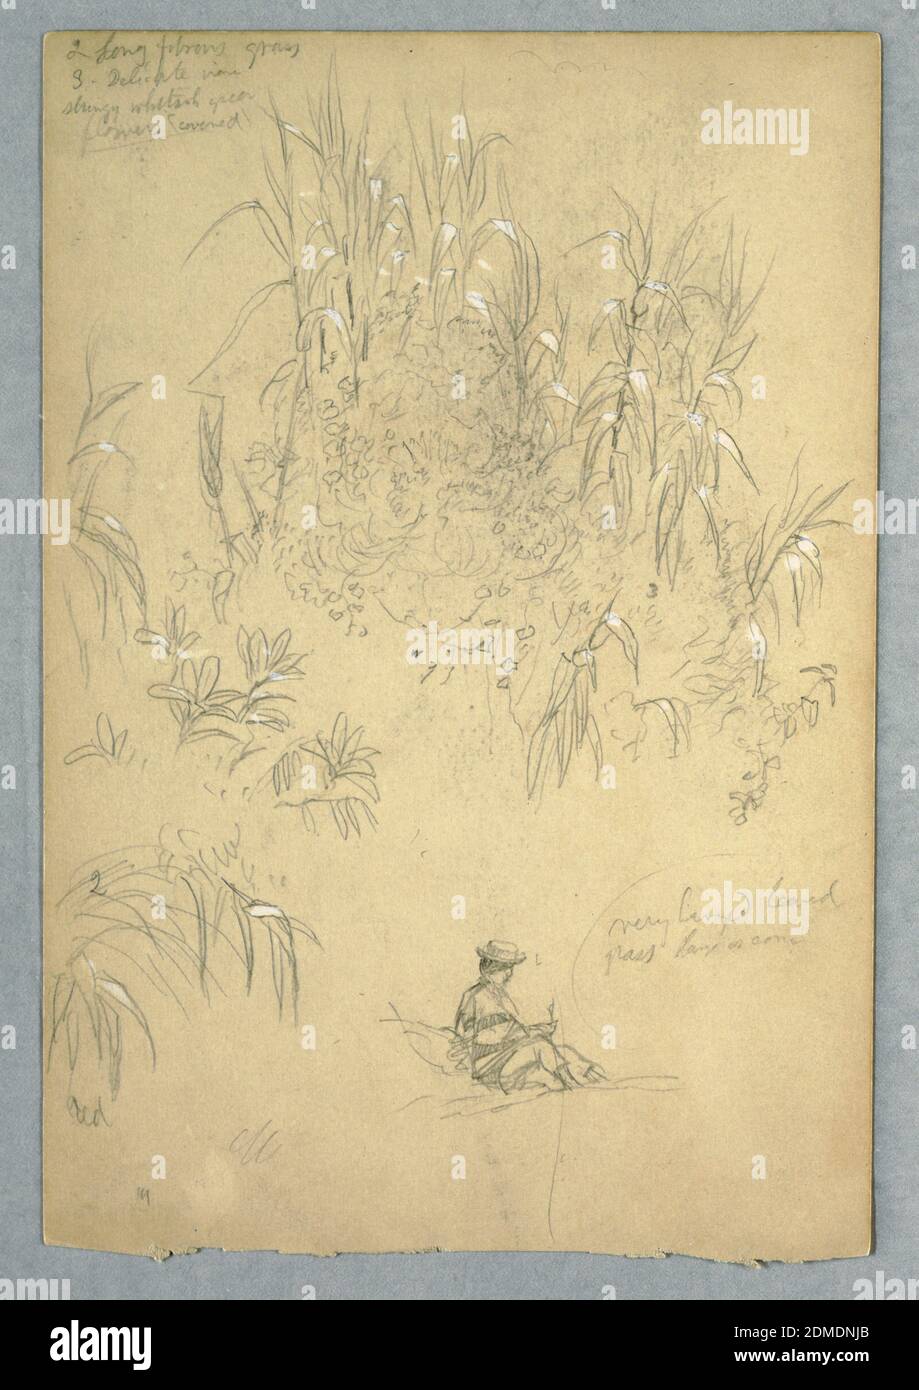 A Detailed Study of a Seated Man and a Group of Plants, Ecuador, Frederic Edwin Church, American, 1826–1900, Graphite, brush and white gouache on cream-colored paper, Vertical view of a large group of detailed plant studies with a seated man dressed in native Ecuadorian clothing at lower right., 1857, probably May, nature studies, Drawing Stock Photo